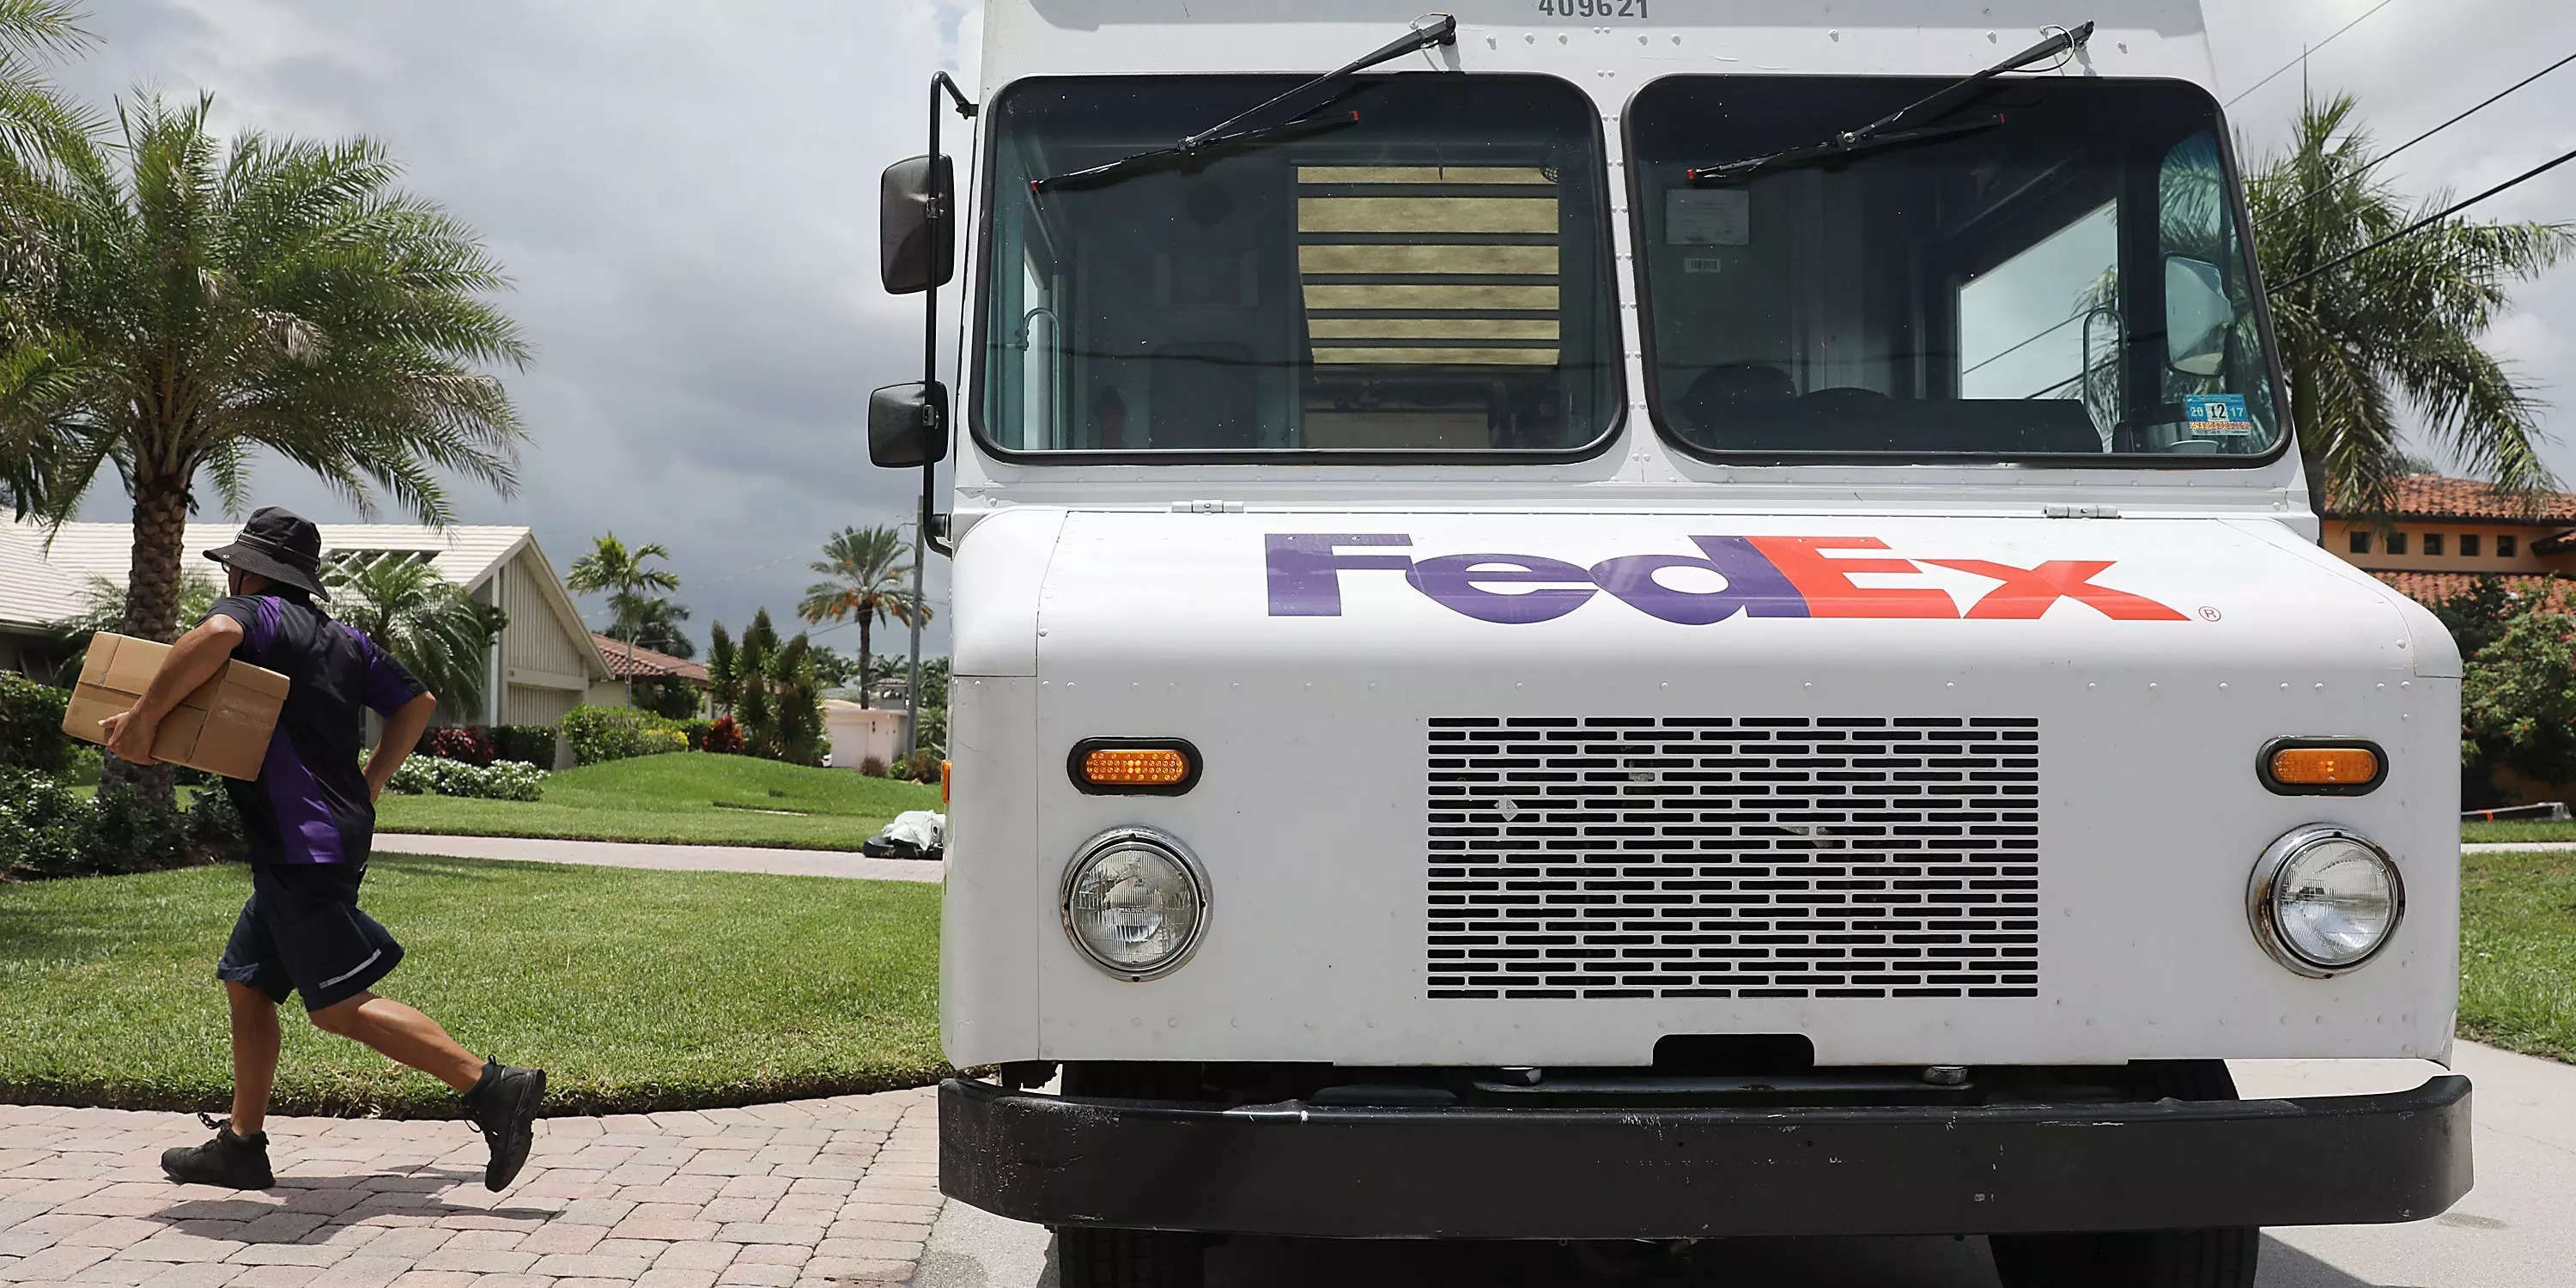 US stocks fall as FedEx warning highlights recession fears ahead of more Fed rate hikes